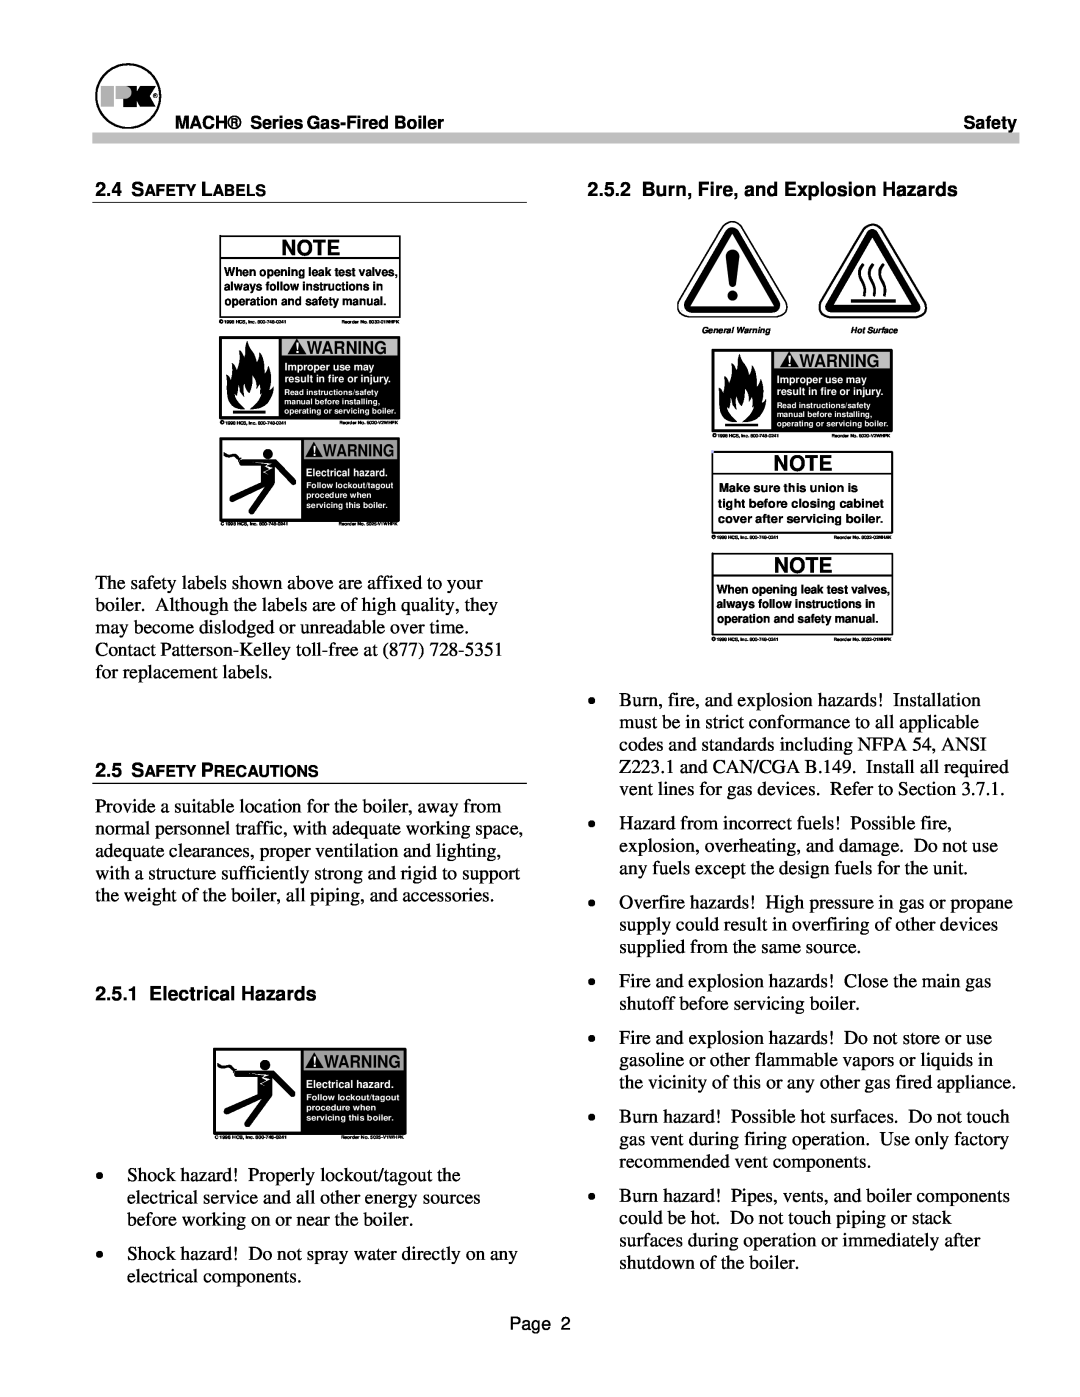 Patterson-Kelley MACH-05 Burn, Fire, and Explosion Hazards, Electrical Hazards, 2.4SAFETY LABELS, 2.5SAFETY PRECAUTIONS 